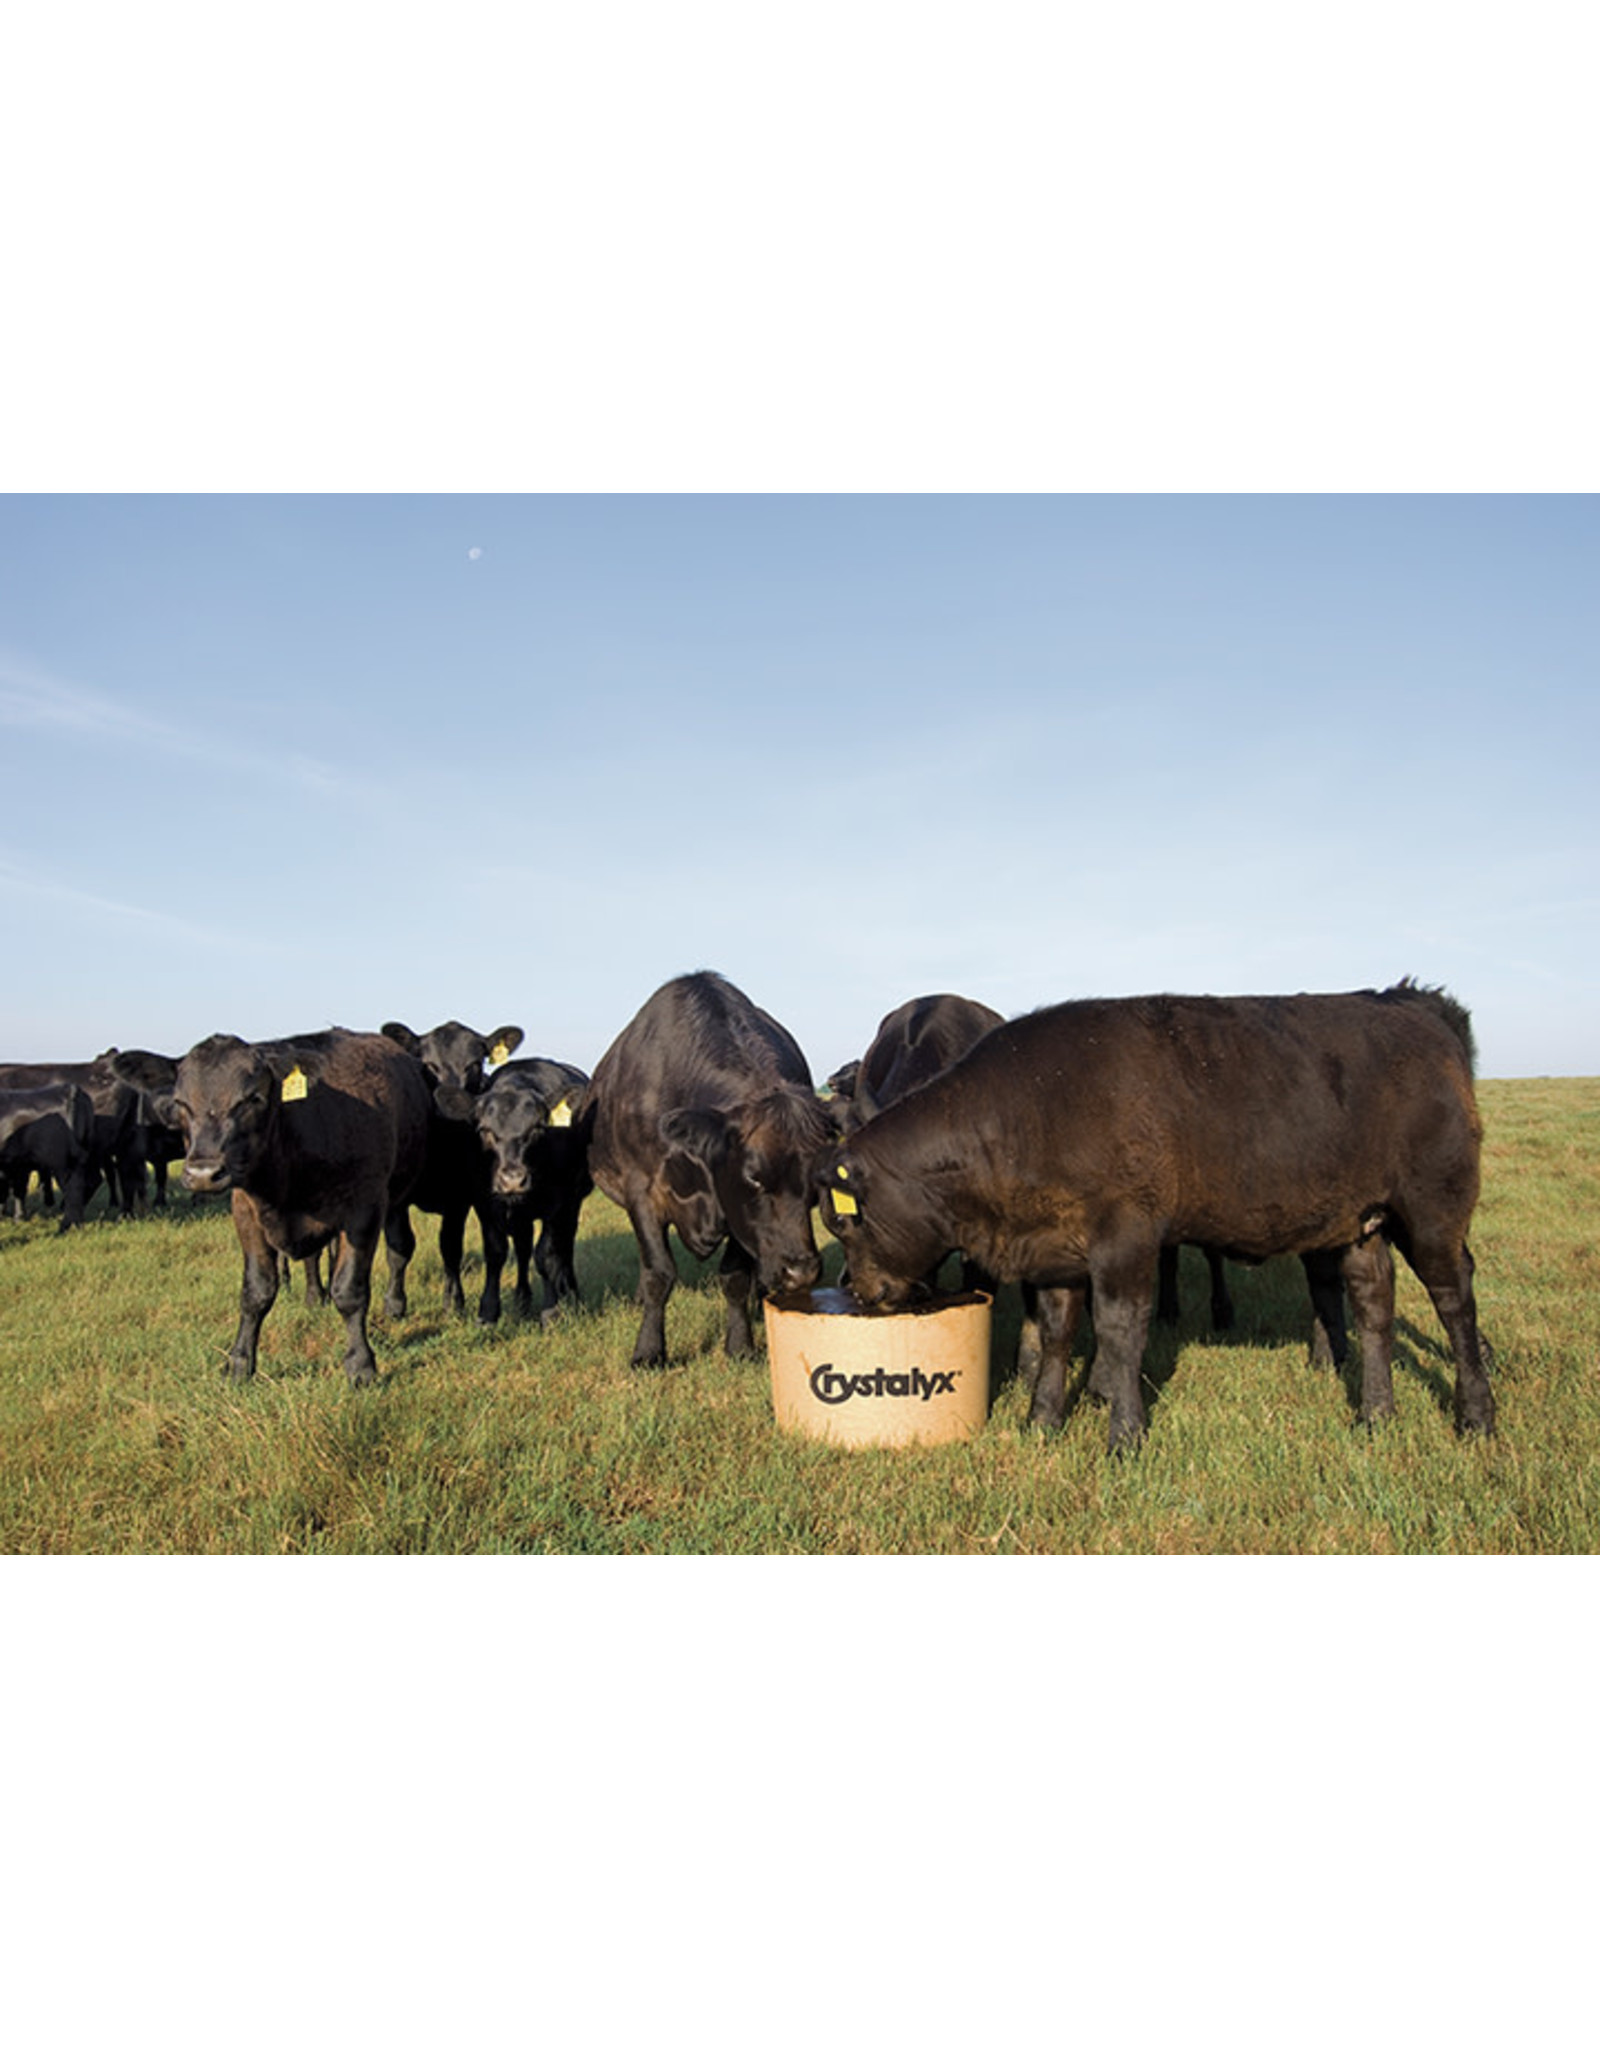 Crystalyx VP 30% - 200lbs Biodegradable, edible barrel. Late season pastures, crop residue, and moderate to low quality harvested forages. Protein 30.0% Fat 4.0% Fiber 3.0% Calcium 2.0% Phosphorus 2.0% Magn. 1.0% Potassium